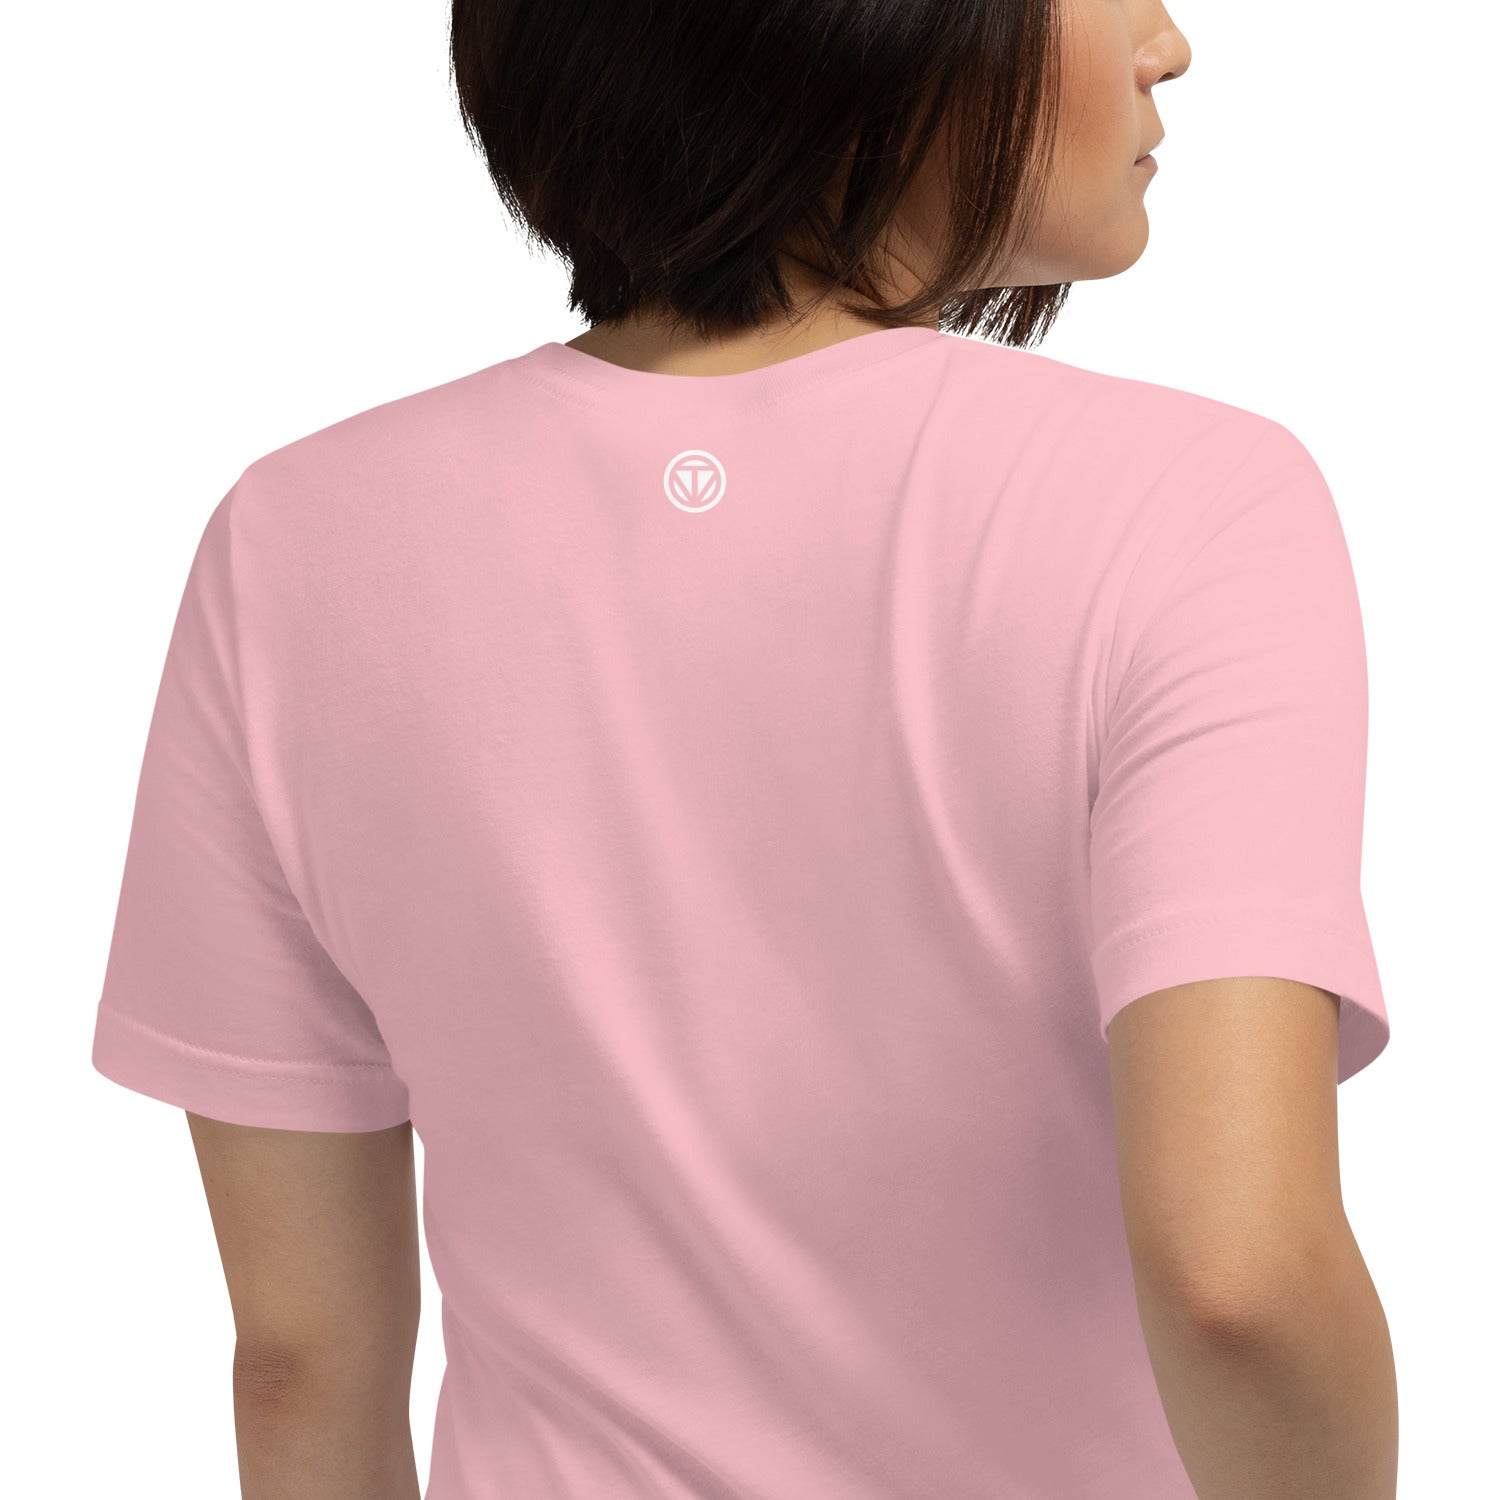 TIME OF VIBES Baumwoll T-Shirt PEACE-LOVE (Pink-Weiß) - €25,00